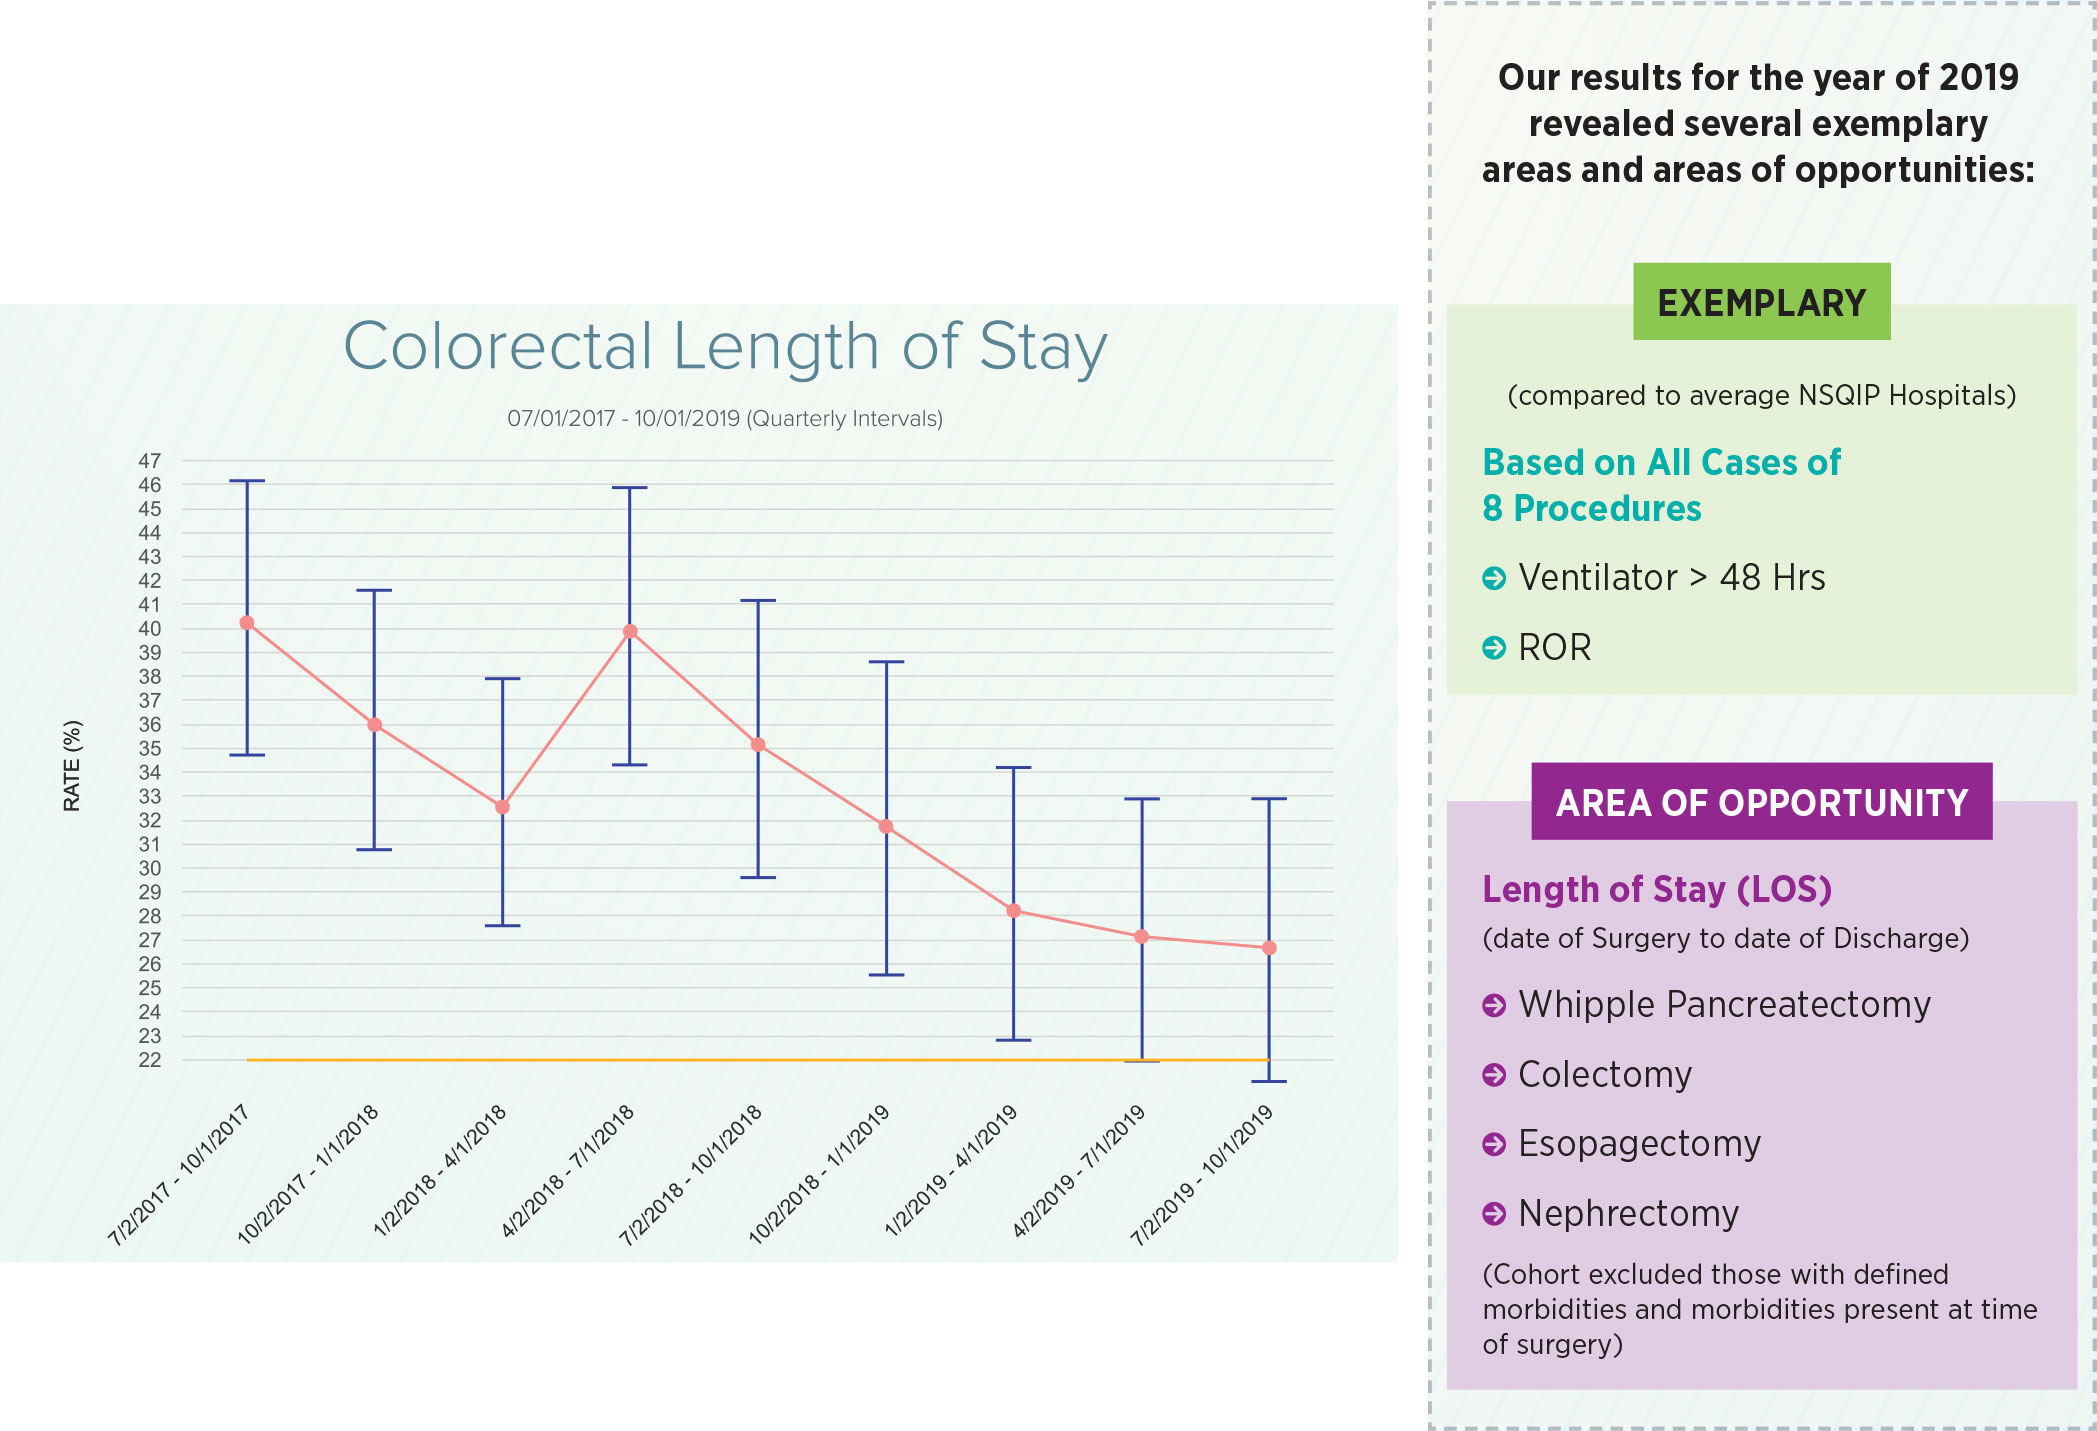 colorectal-length-of-stay_results-2019.jpg